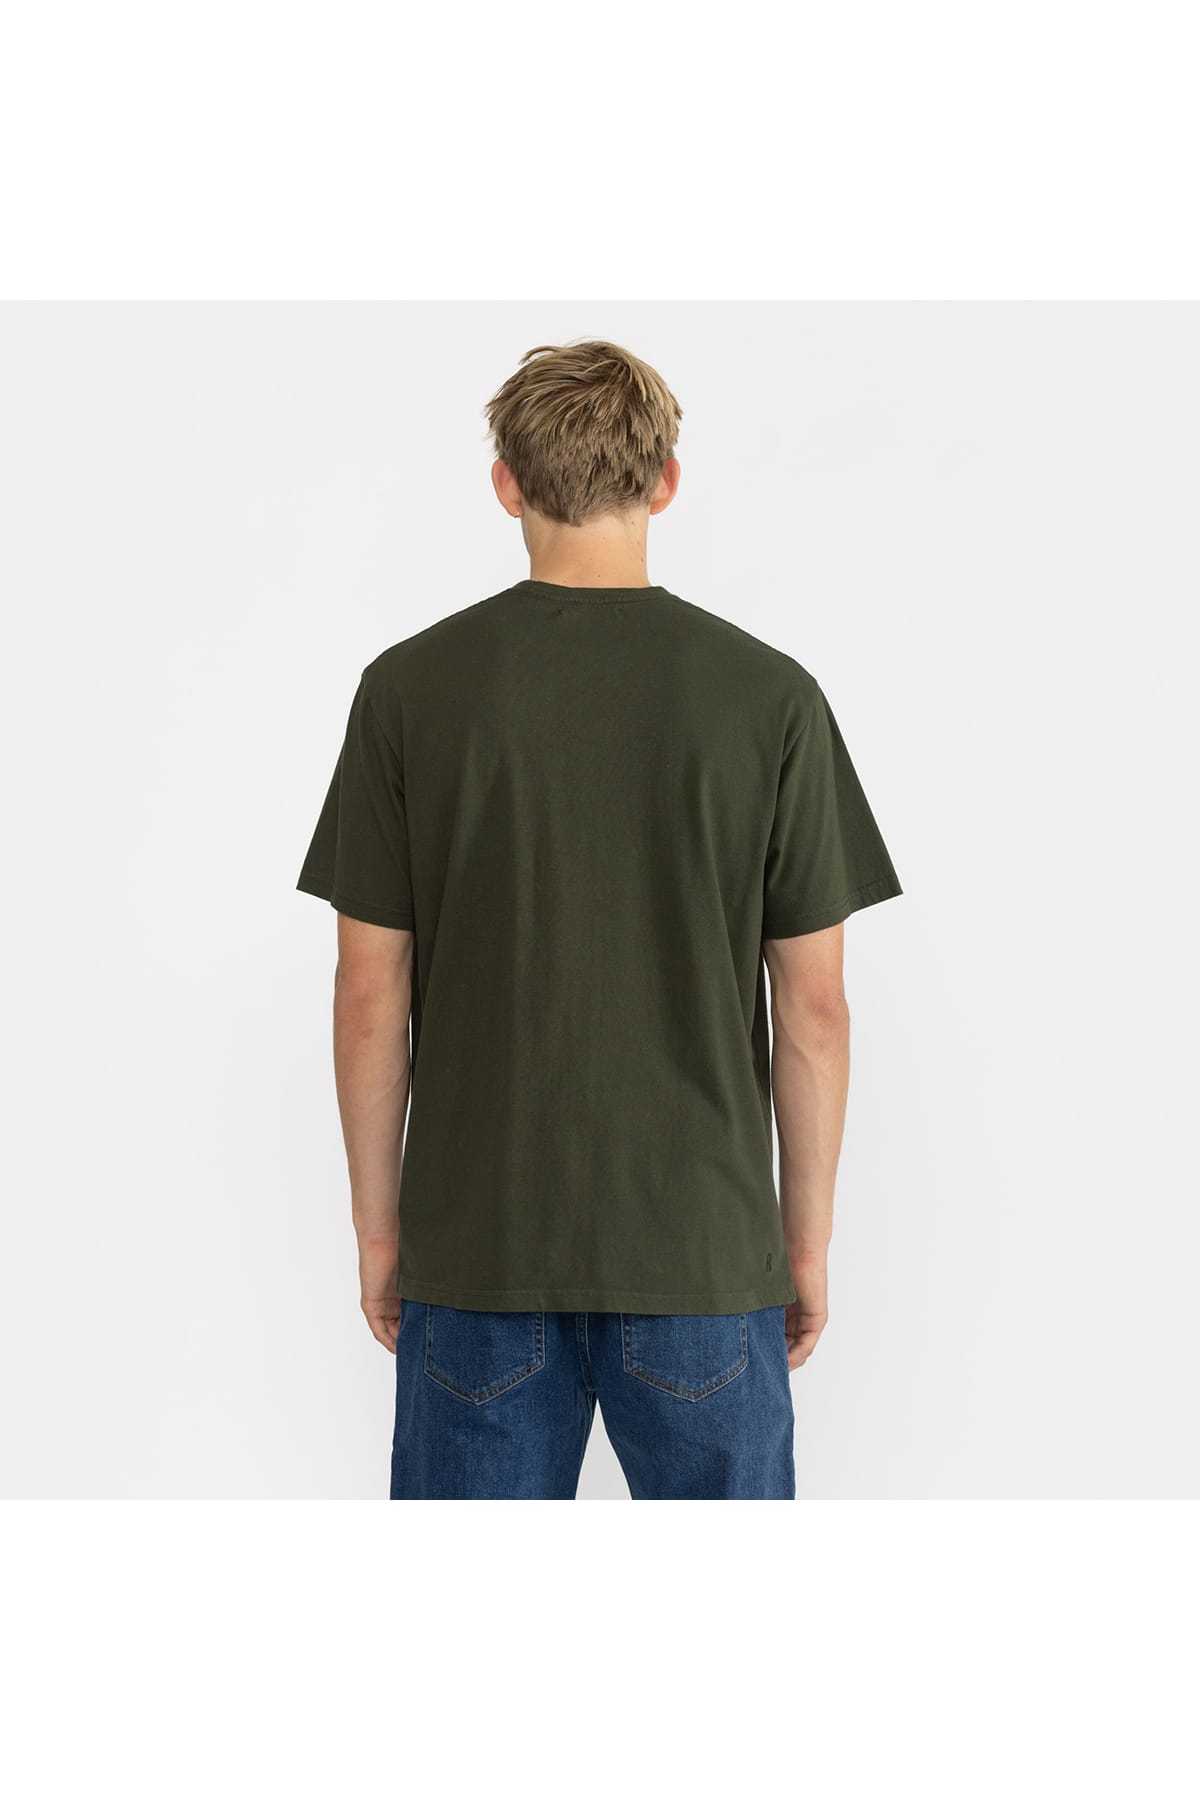 T-Shirt Loose Fit Army T-Shirt RVLT Revolution 